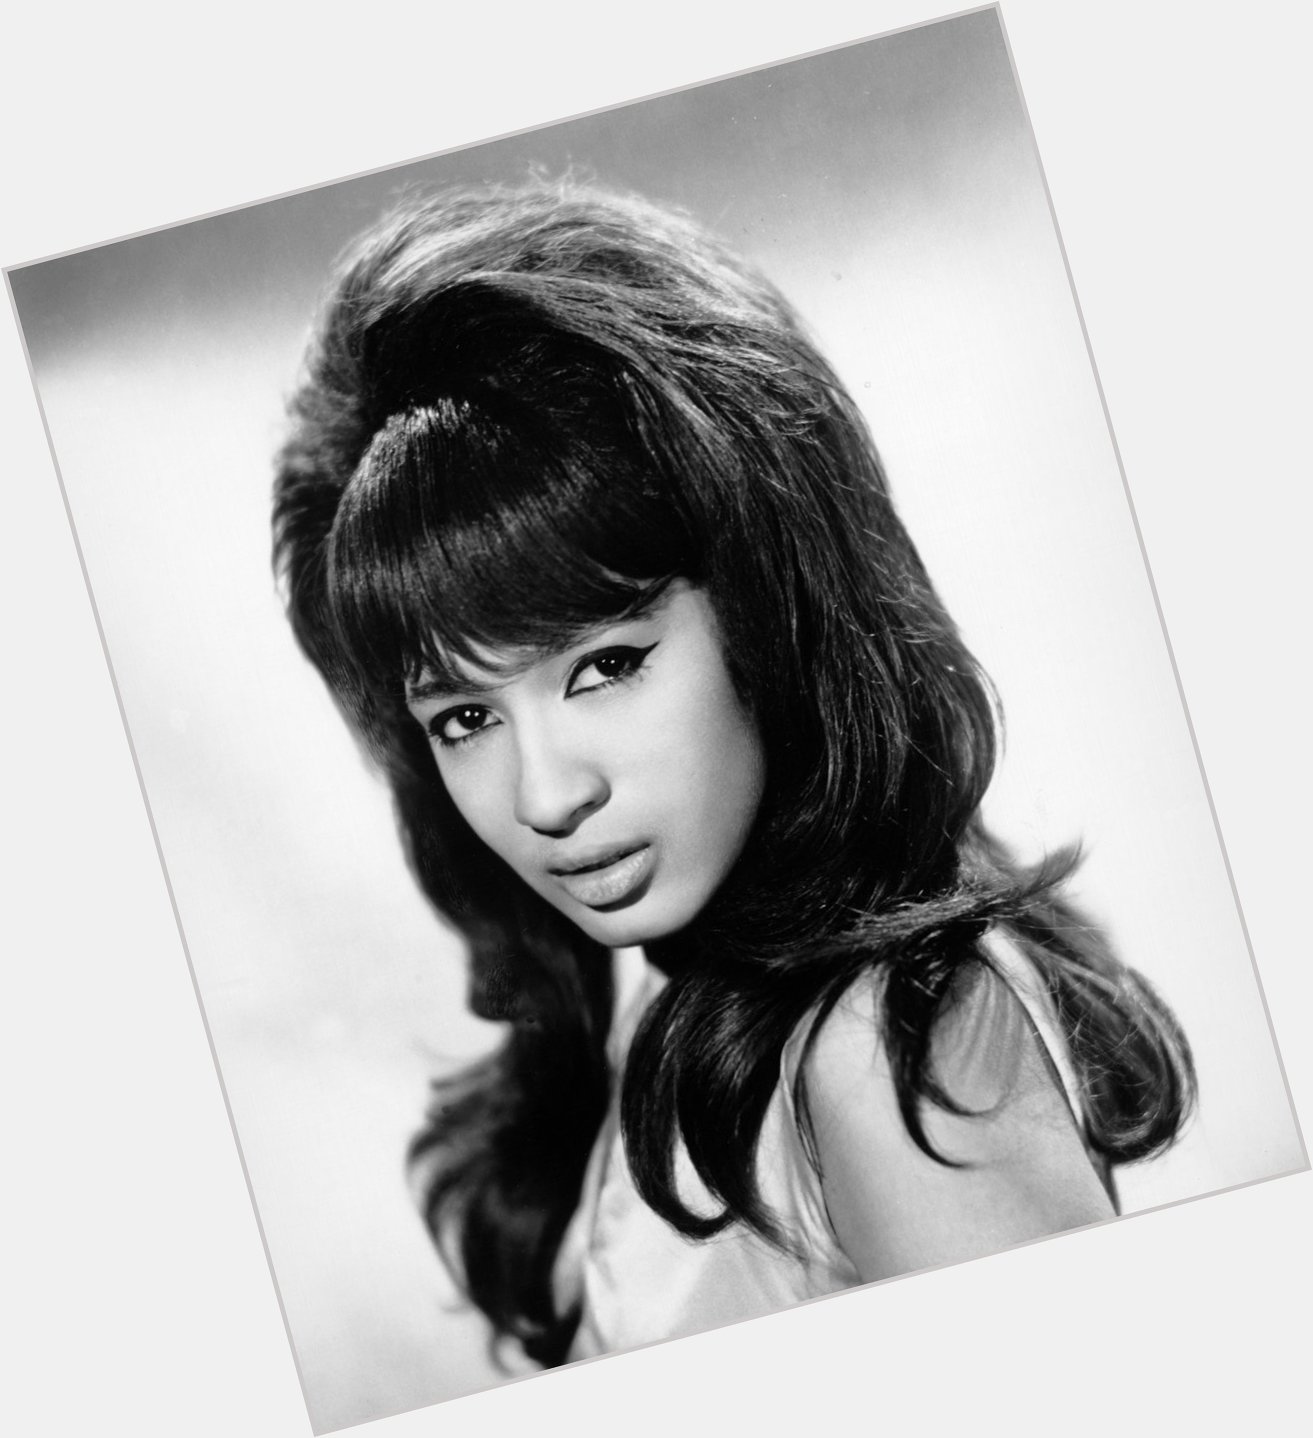 Happy Birthday to Ronnie Spector, former lead singer with The Ronnettes, born on this day in New York in 1943.   